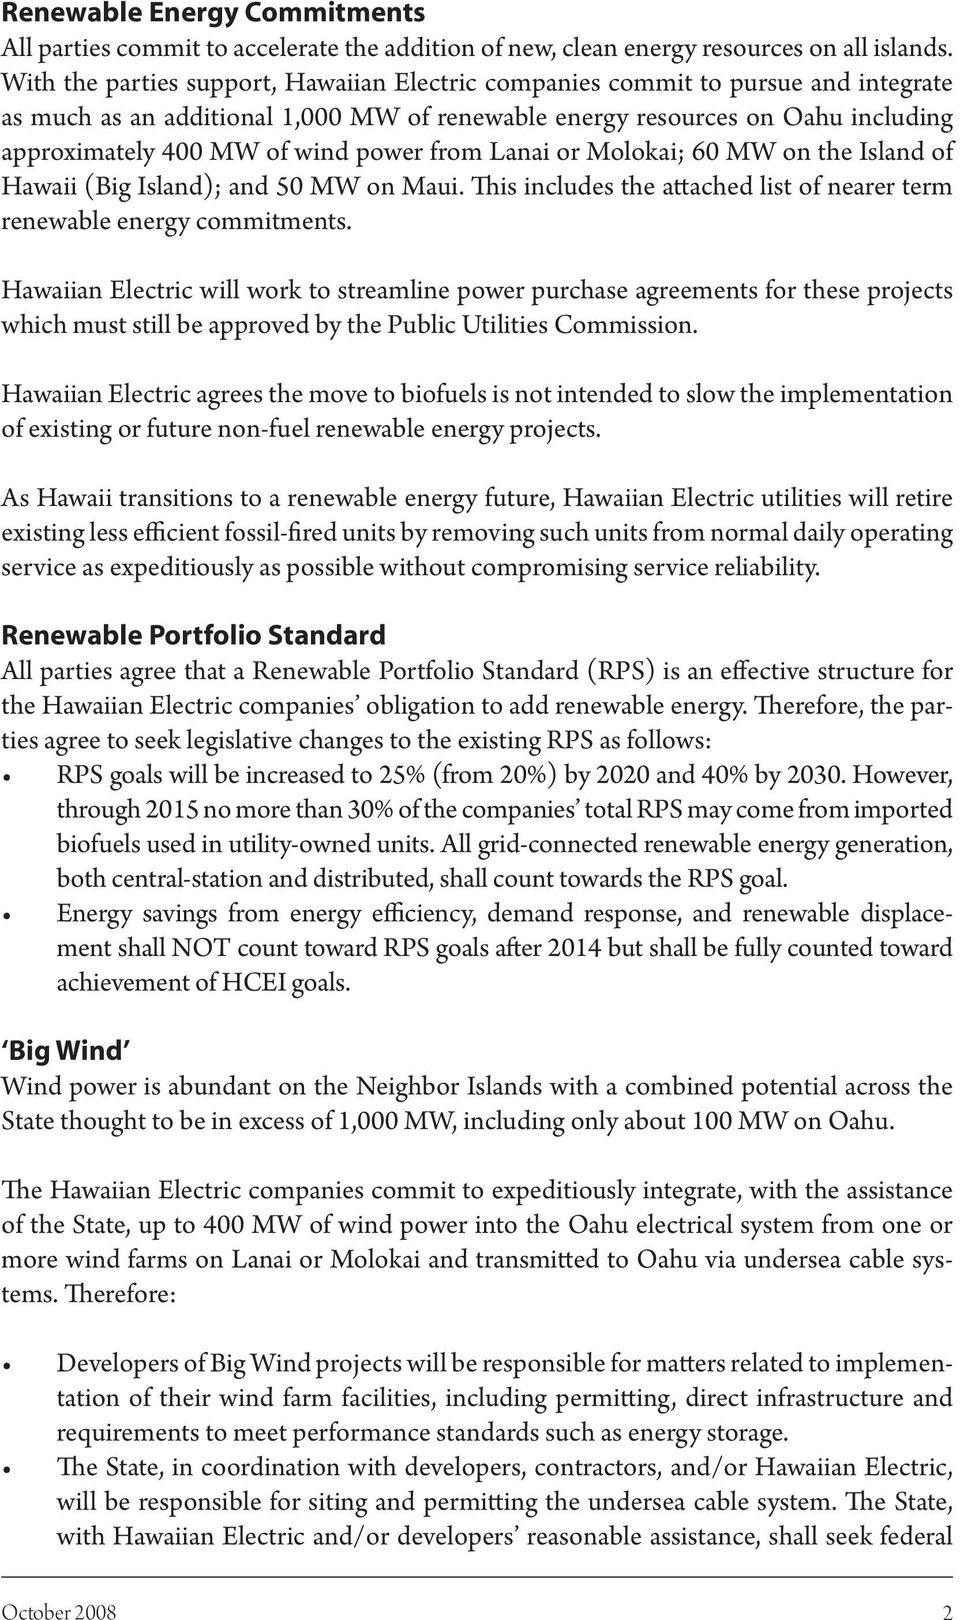 power from Lanai or Molokai; 60 MW on the Island of Hawaii (Big Island); and 50 MW on Maui. This includes the attached list of nearer term renewable energy commitments.